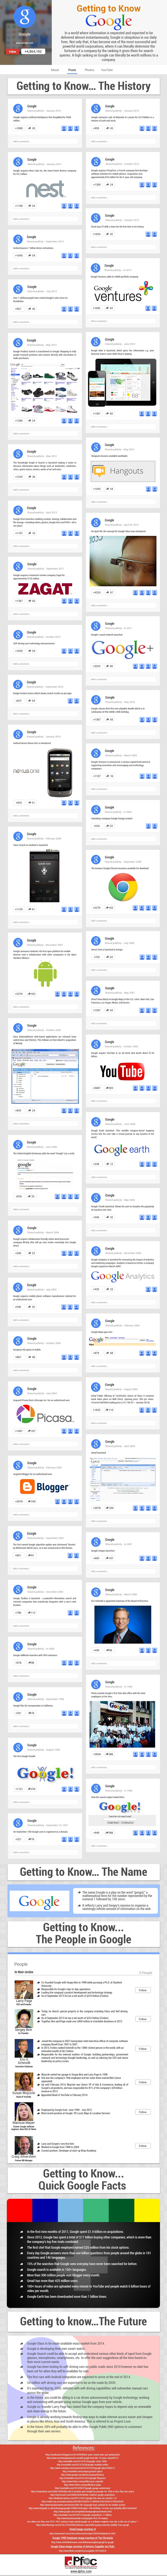 Getting to Know Google - An Infographic